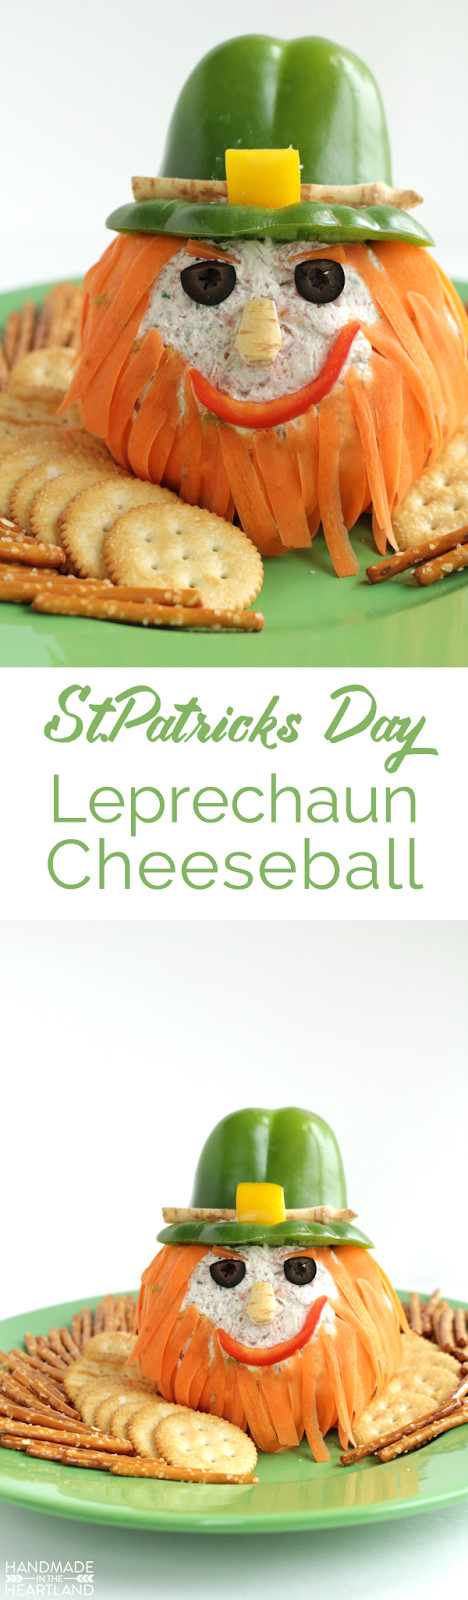 Appetizer For St Patrick's Day Party
 Corned Beef Leprechaun Cheeseball Recipe